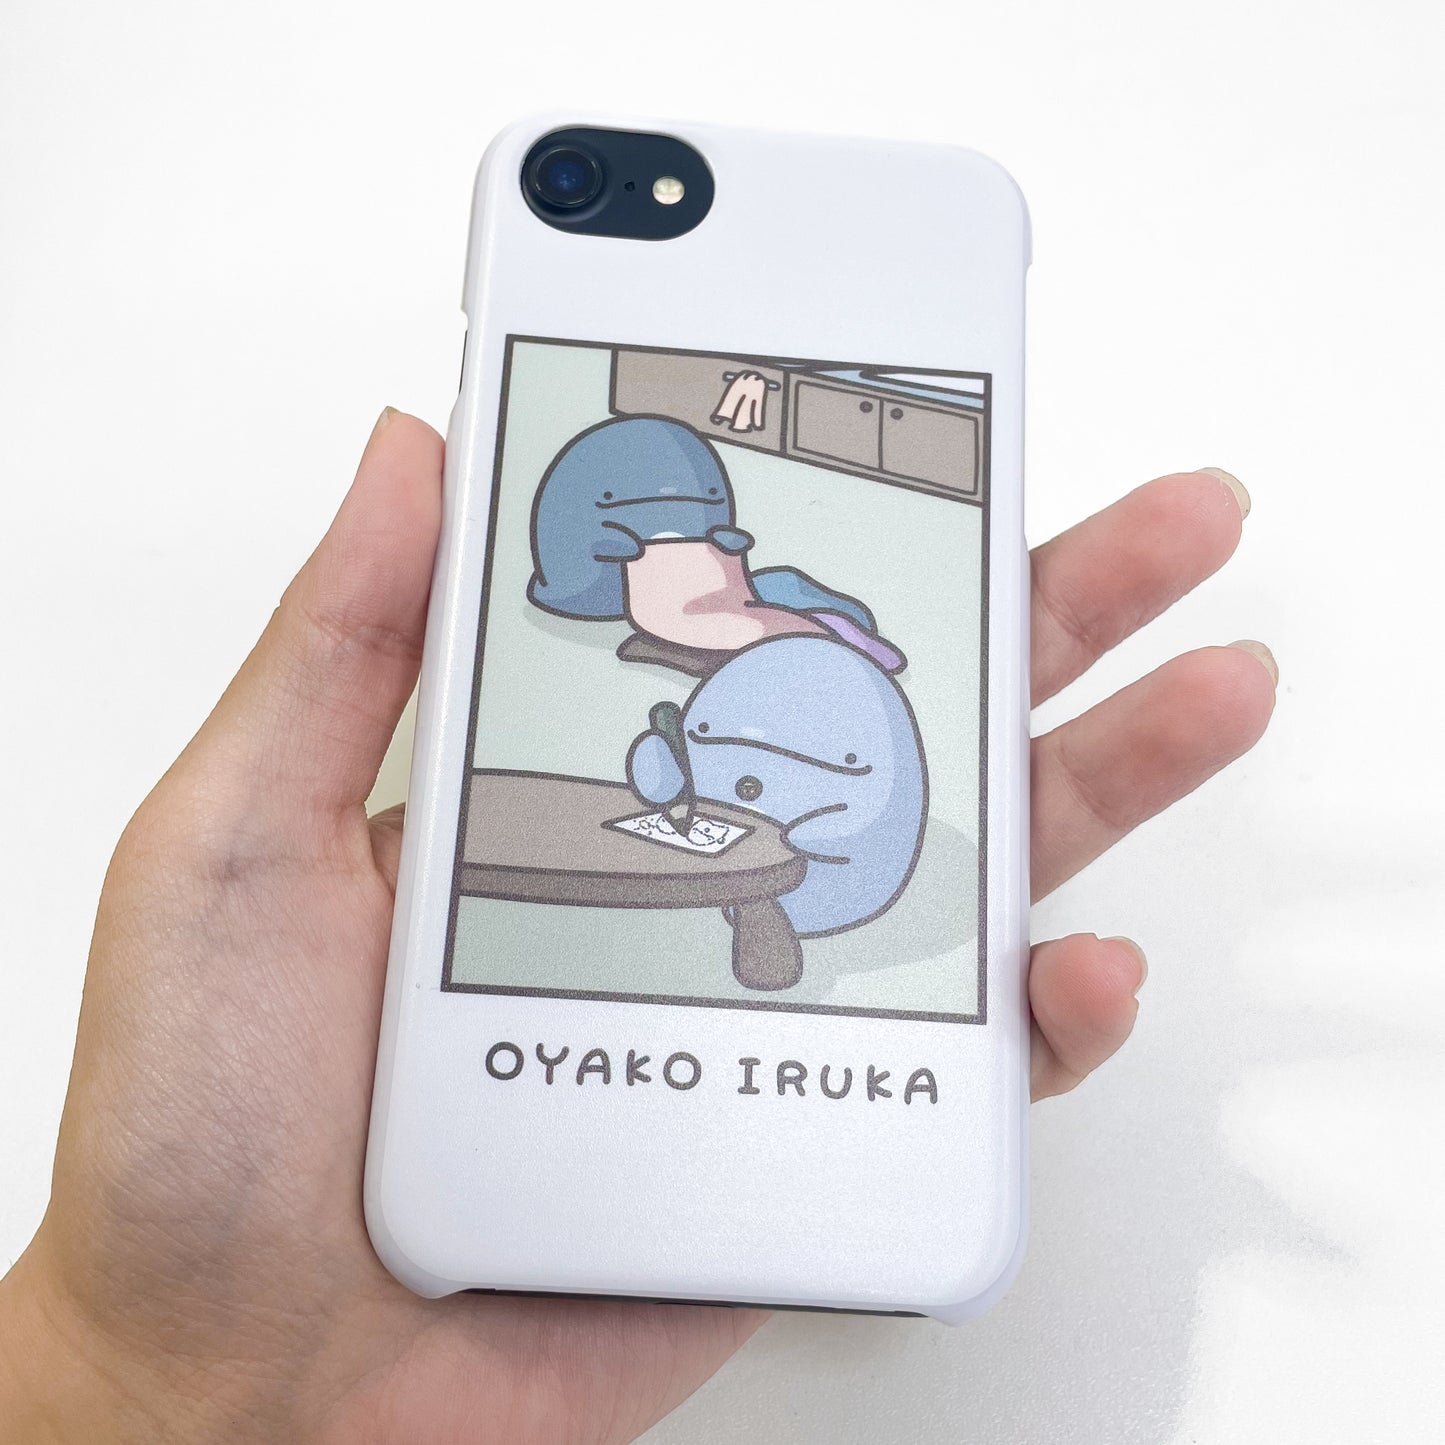 [Parent and child dolphin] Smartphone case compatible with almost all models [shipped in early November]